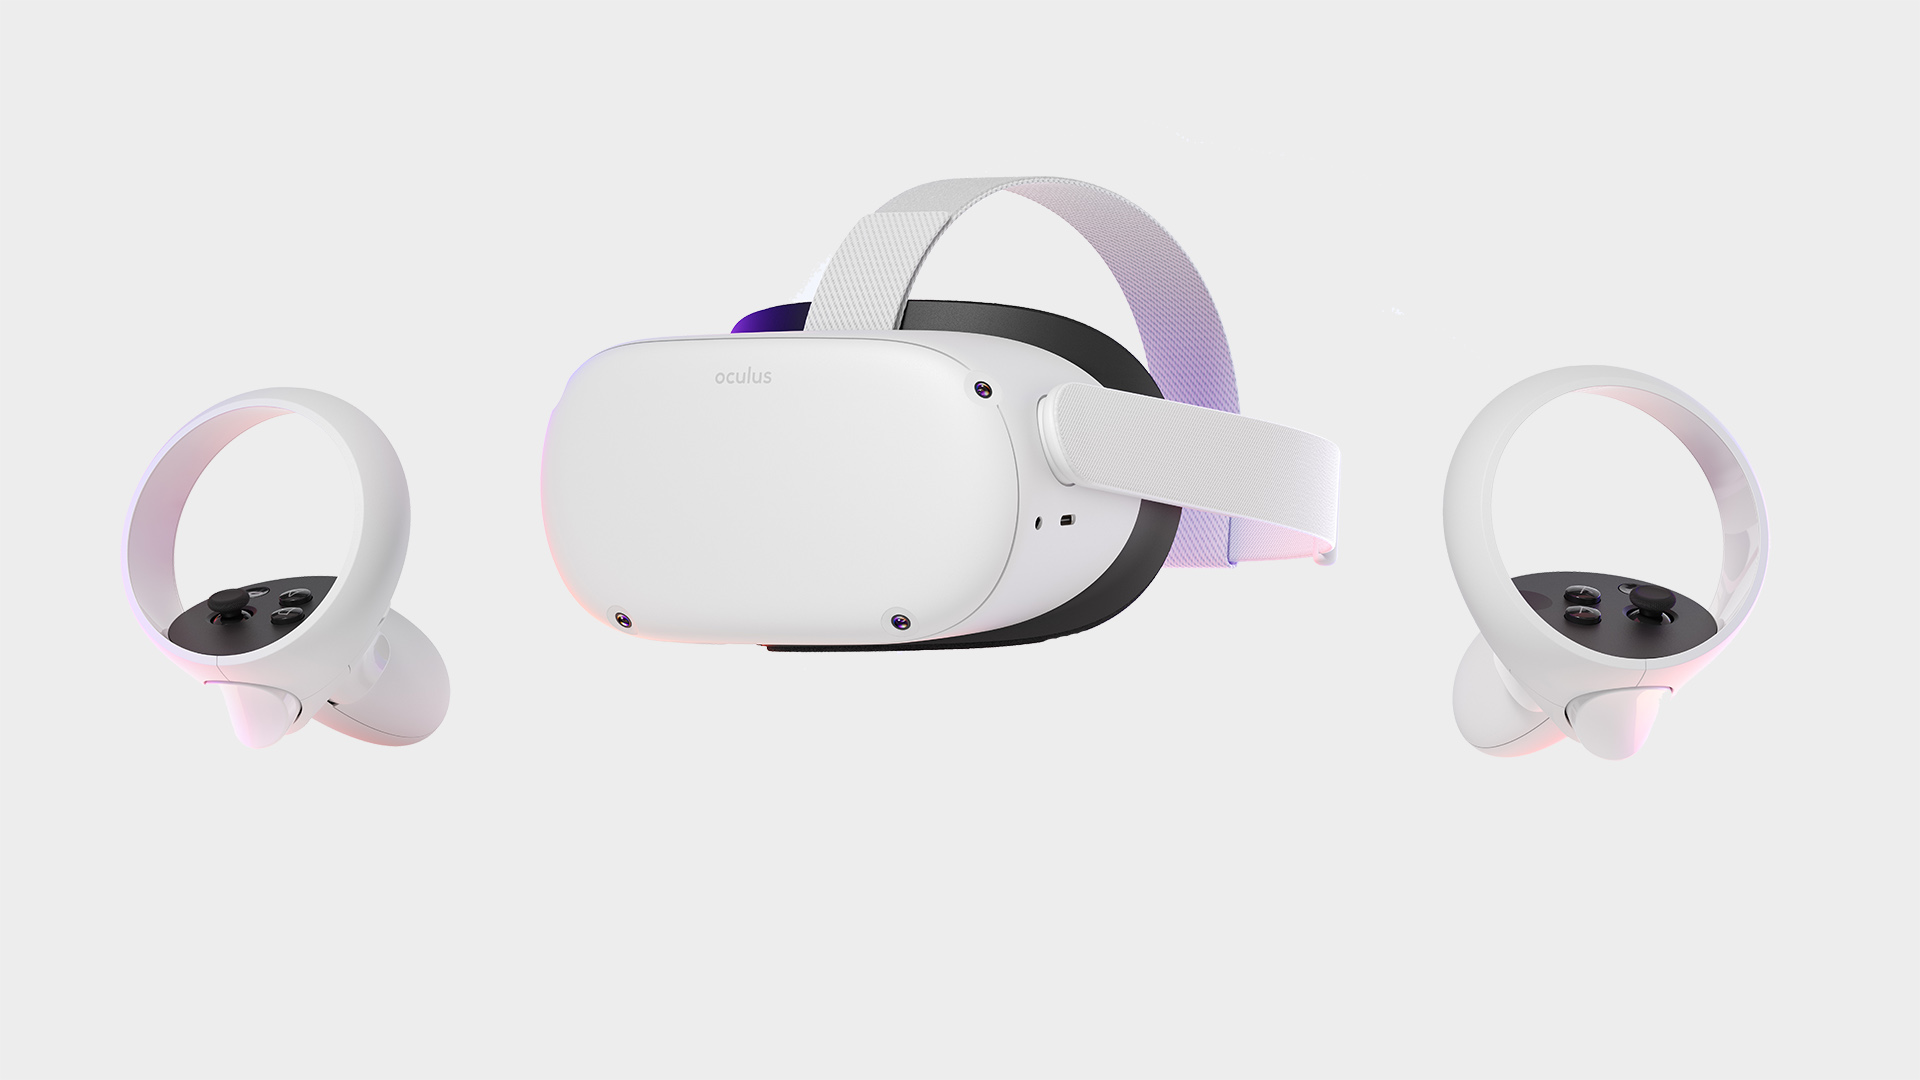 An Oculus Quest 2 pictured on a grey background with two controllers